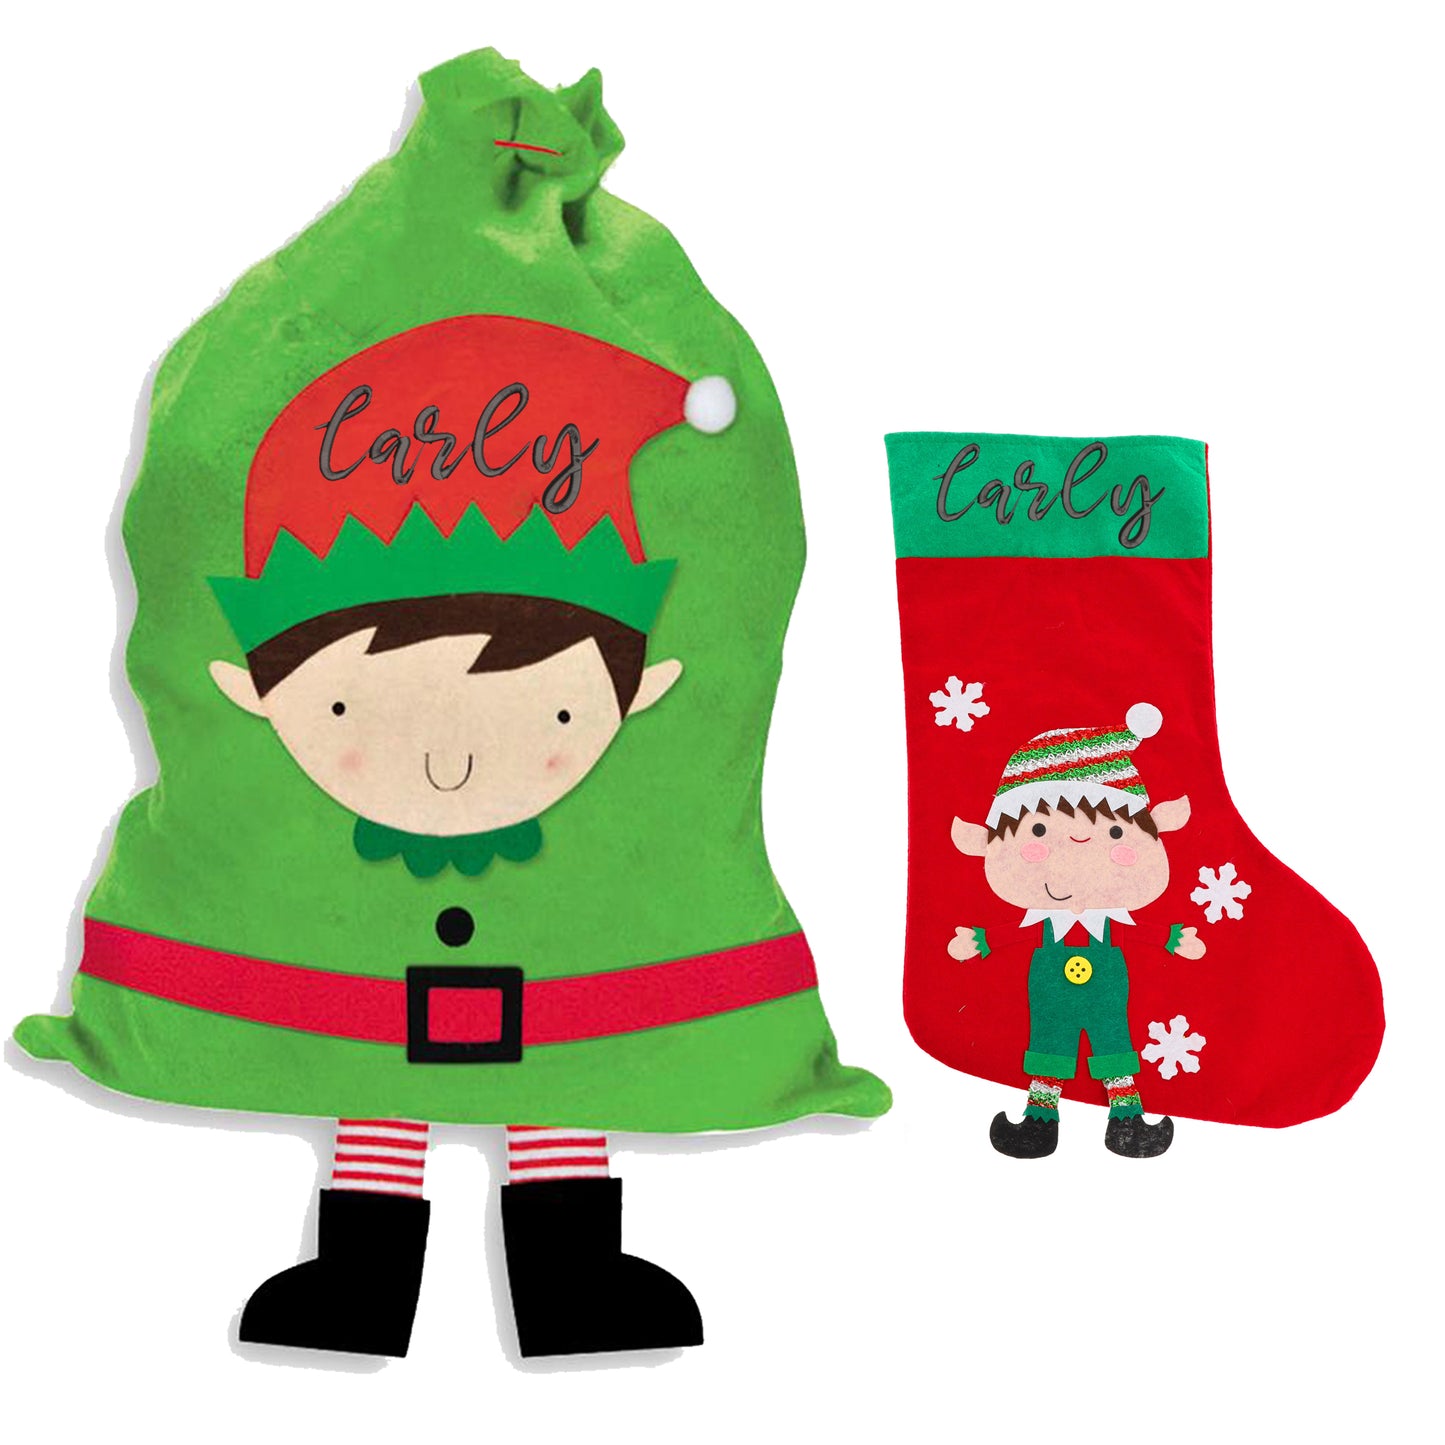 Personalised Embroidered Elf Christmas Stocking and Present Sack Set  - Always Looking Good - Default Title  